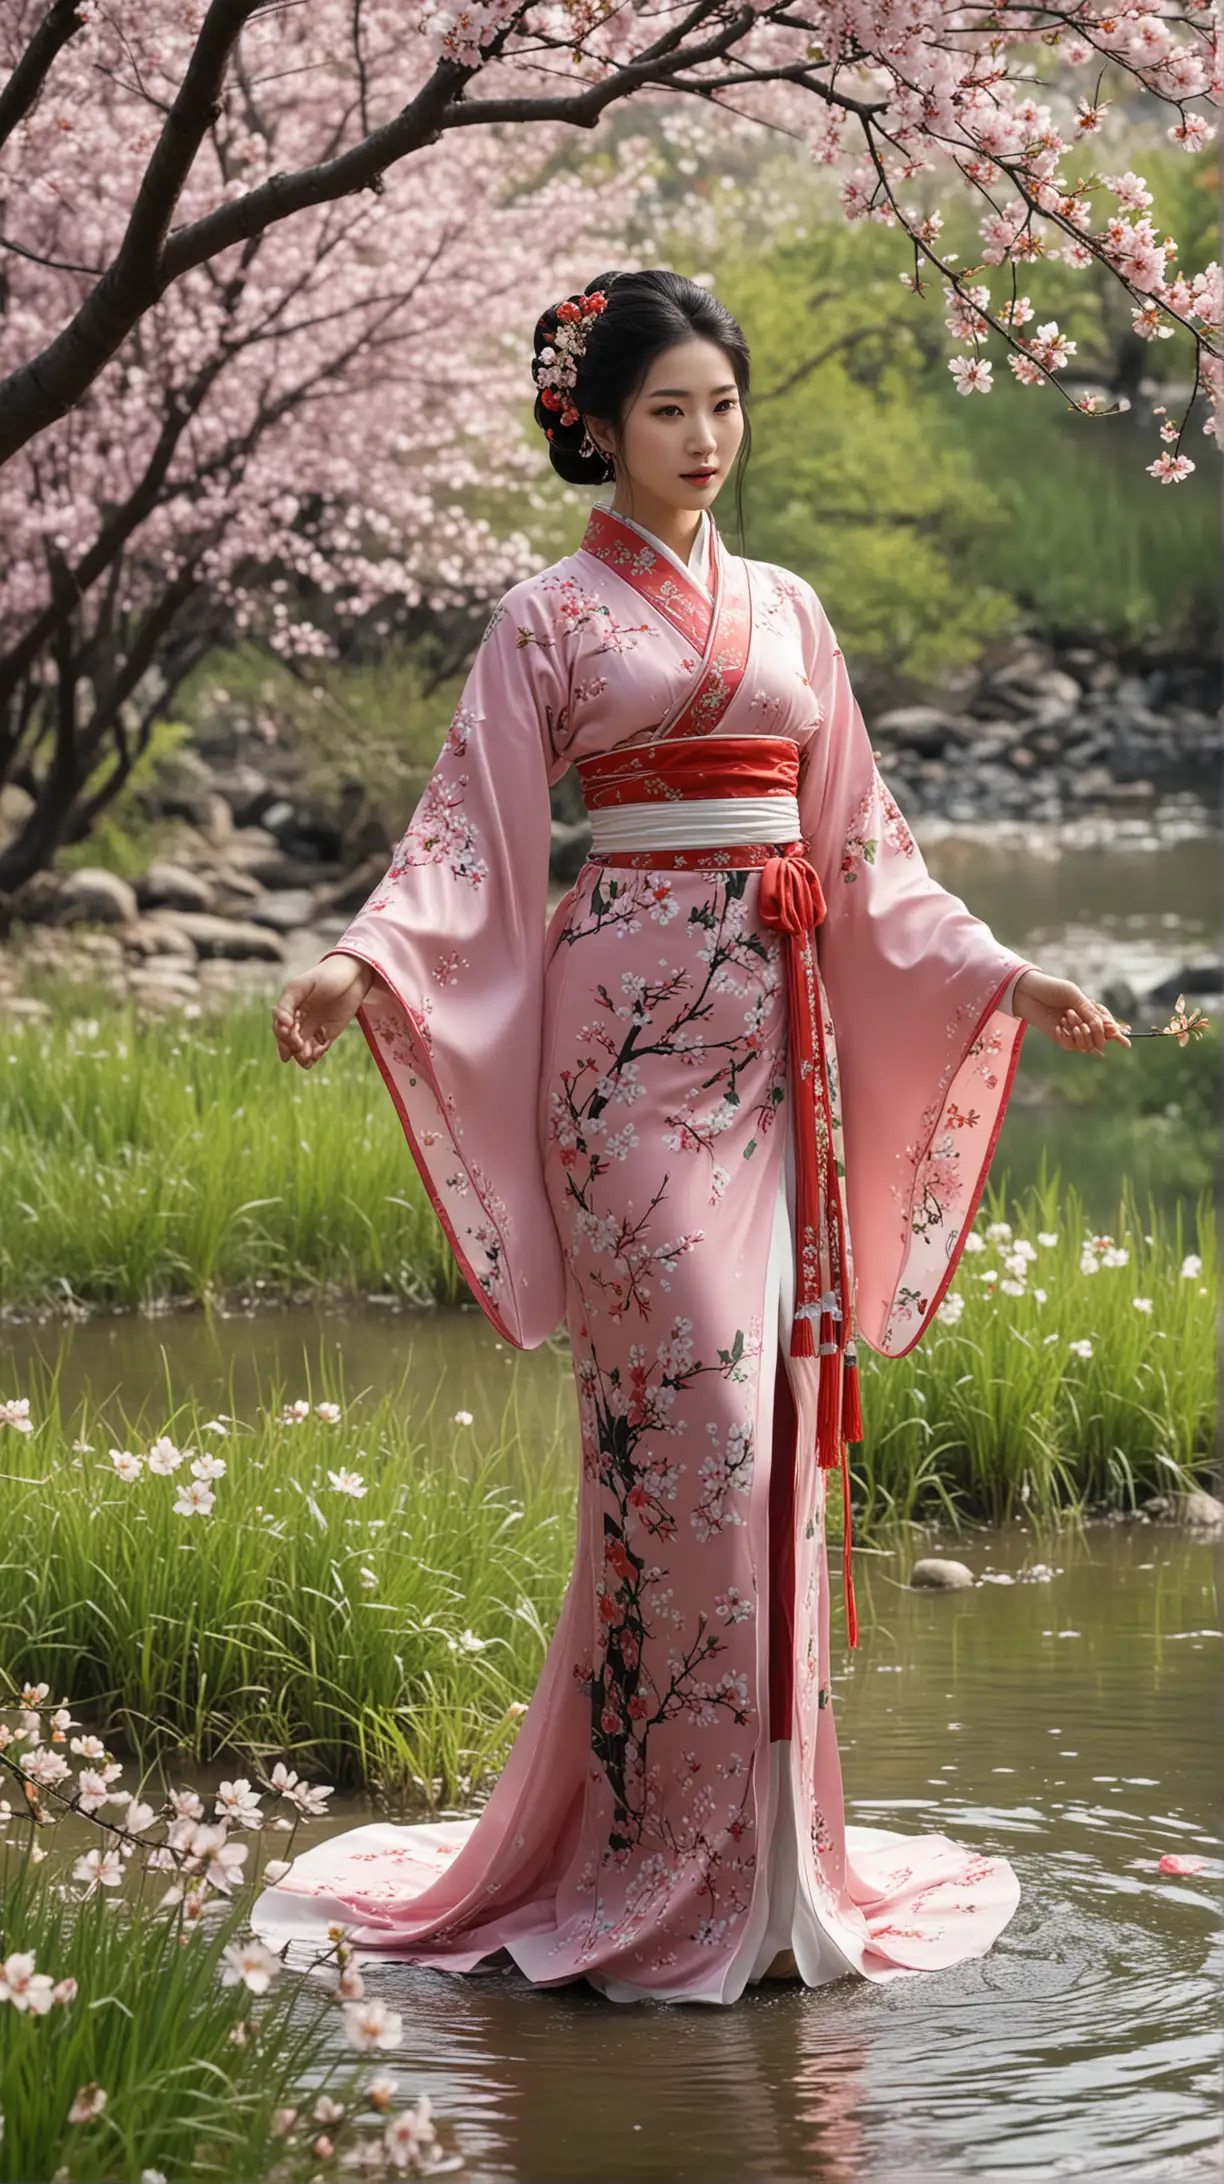 Chinese Woman Amidst Sakura Blossoms by River in Traditional Attire